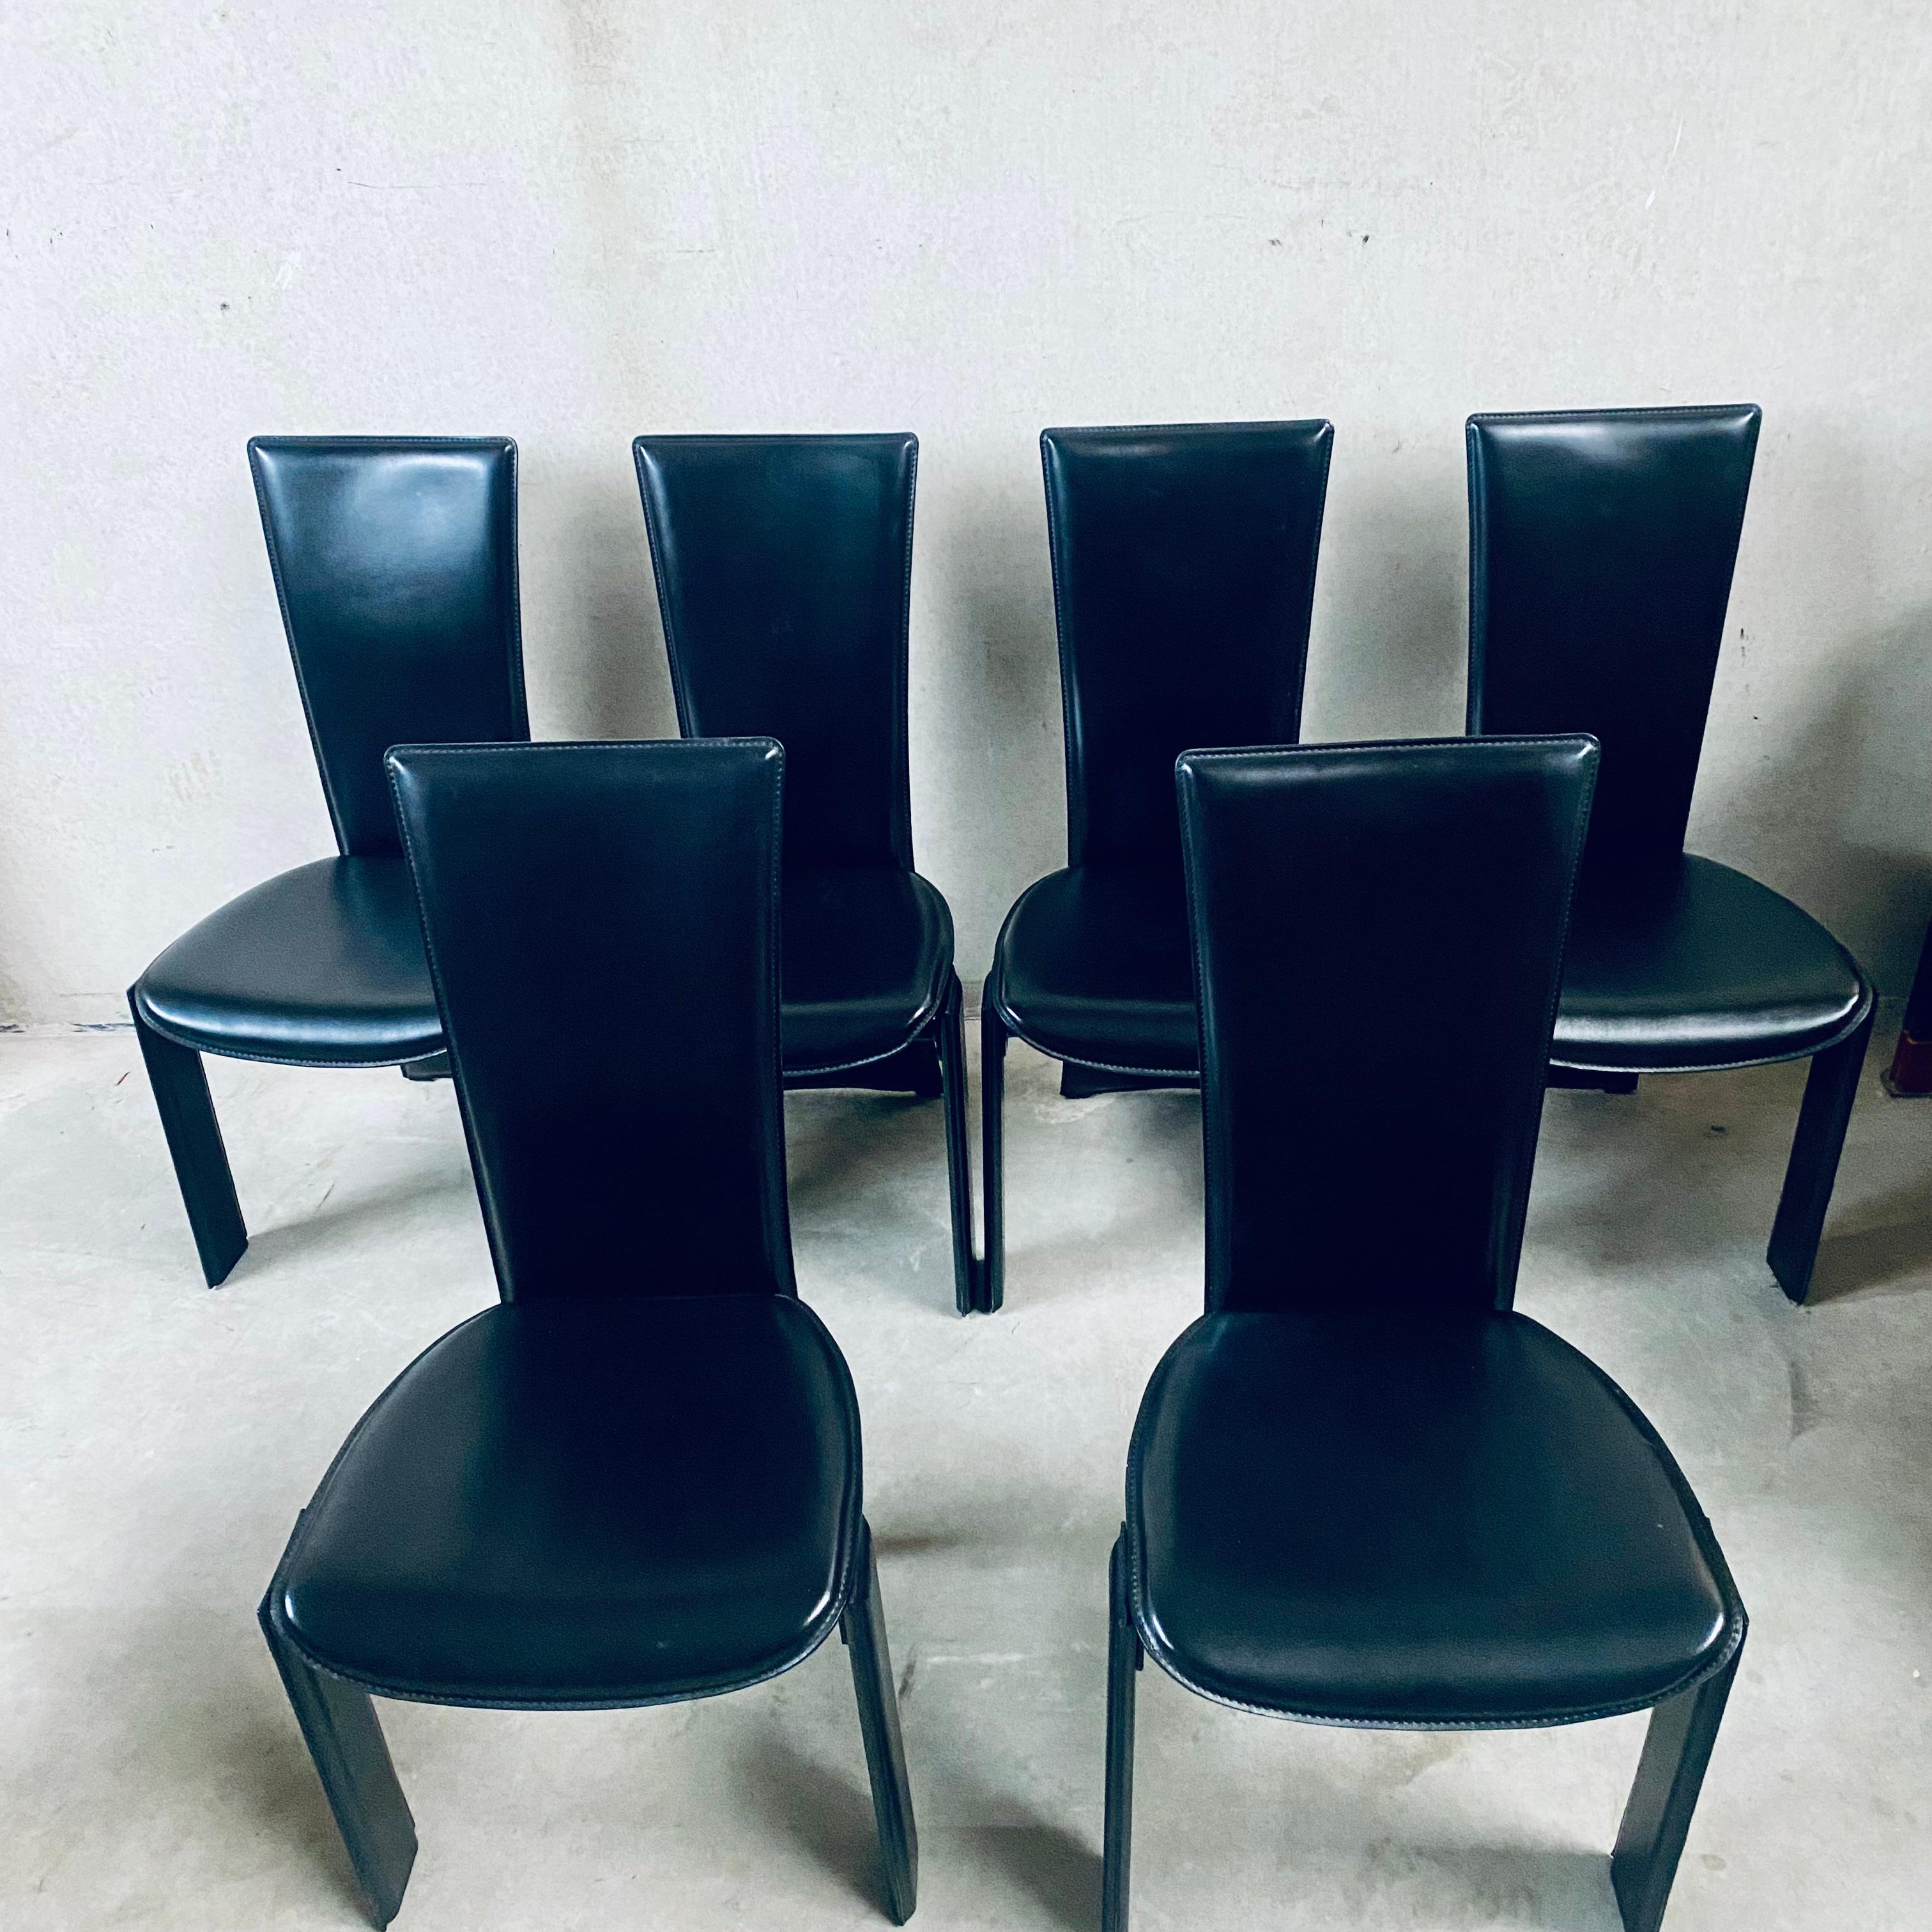 6 x Black Leather Tripot Dining Chairs by Pietro Costantini, Italy 1980 For Sale 5